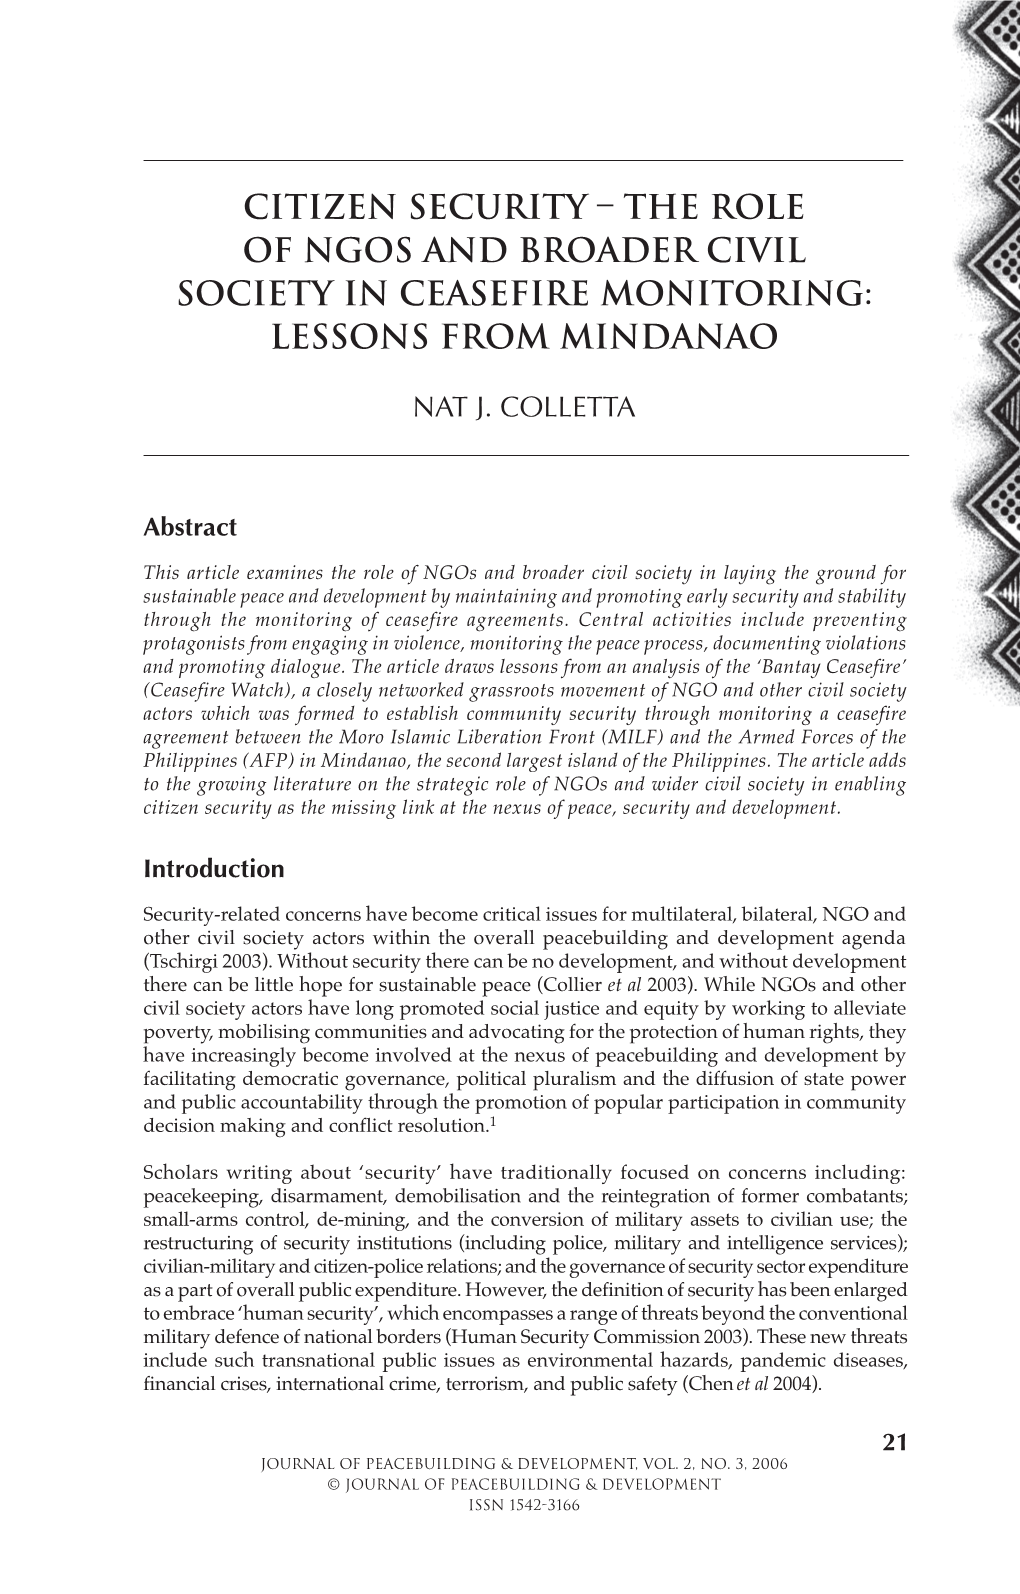 The Role of Ngos and Broader Civil Society in Ceasefire Monitoring: Lessons from Mindanao